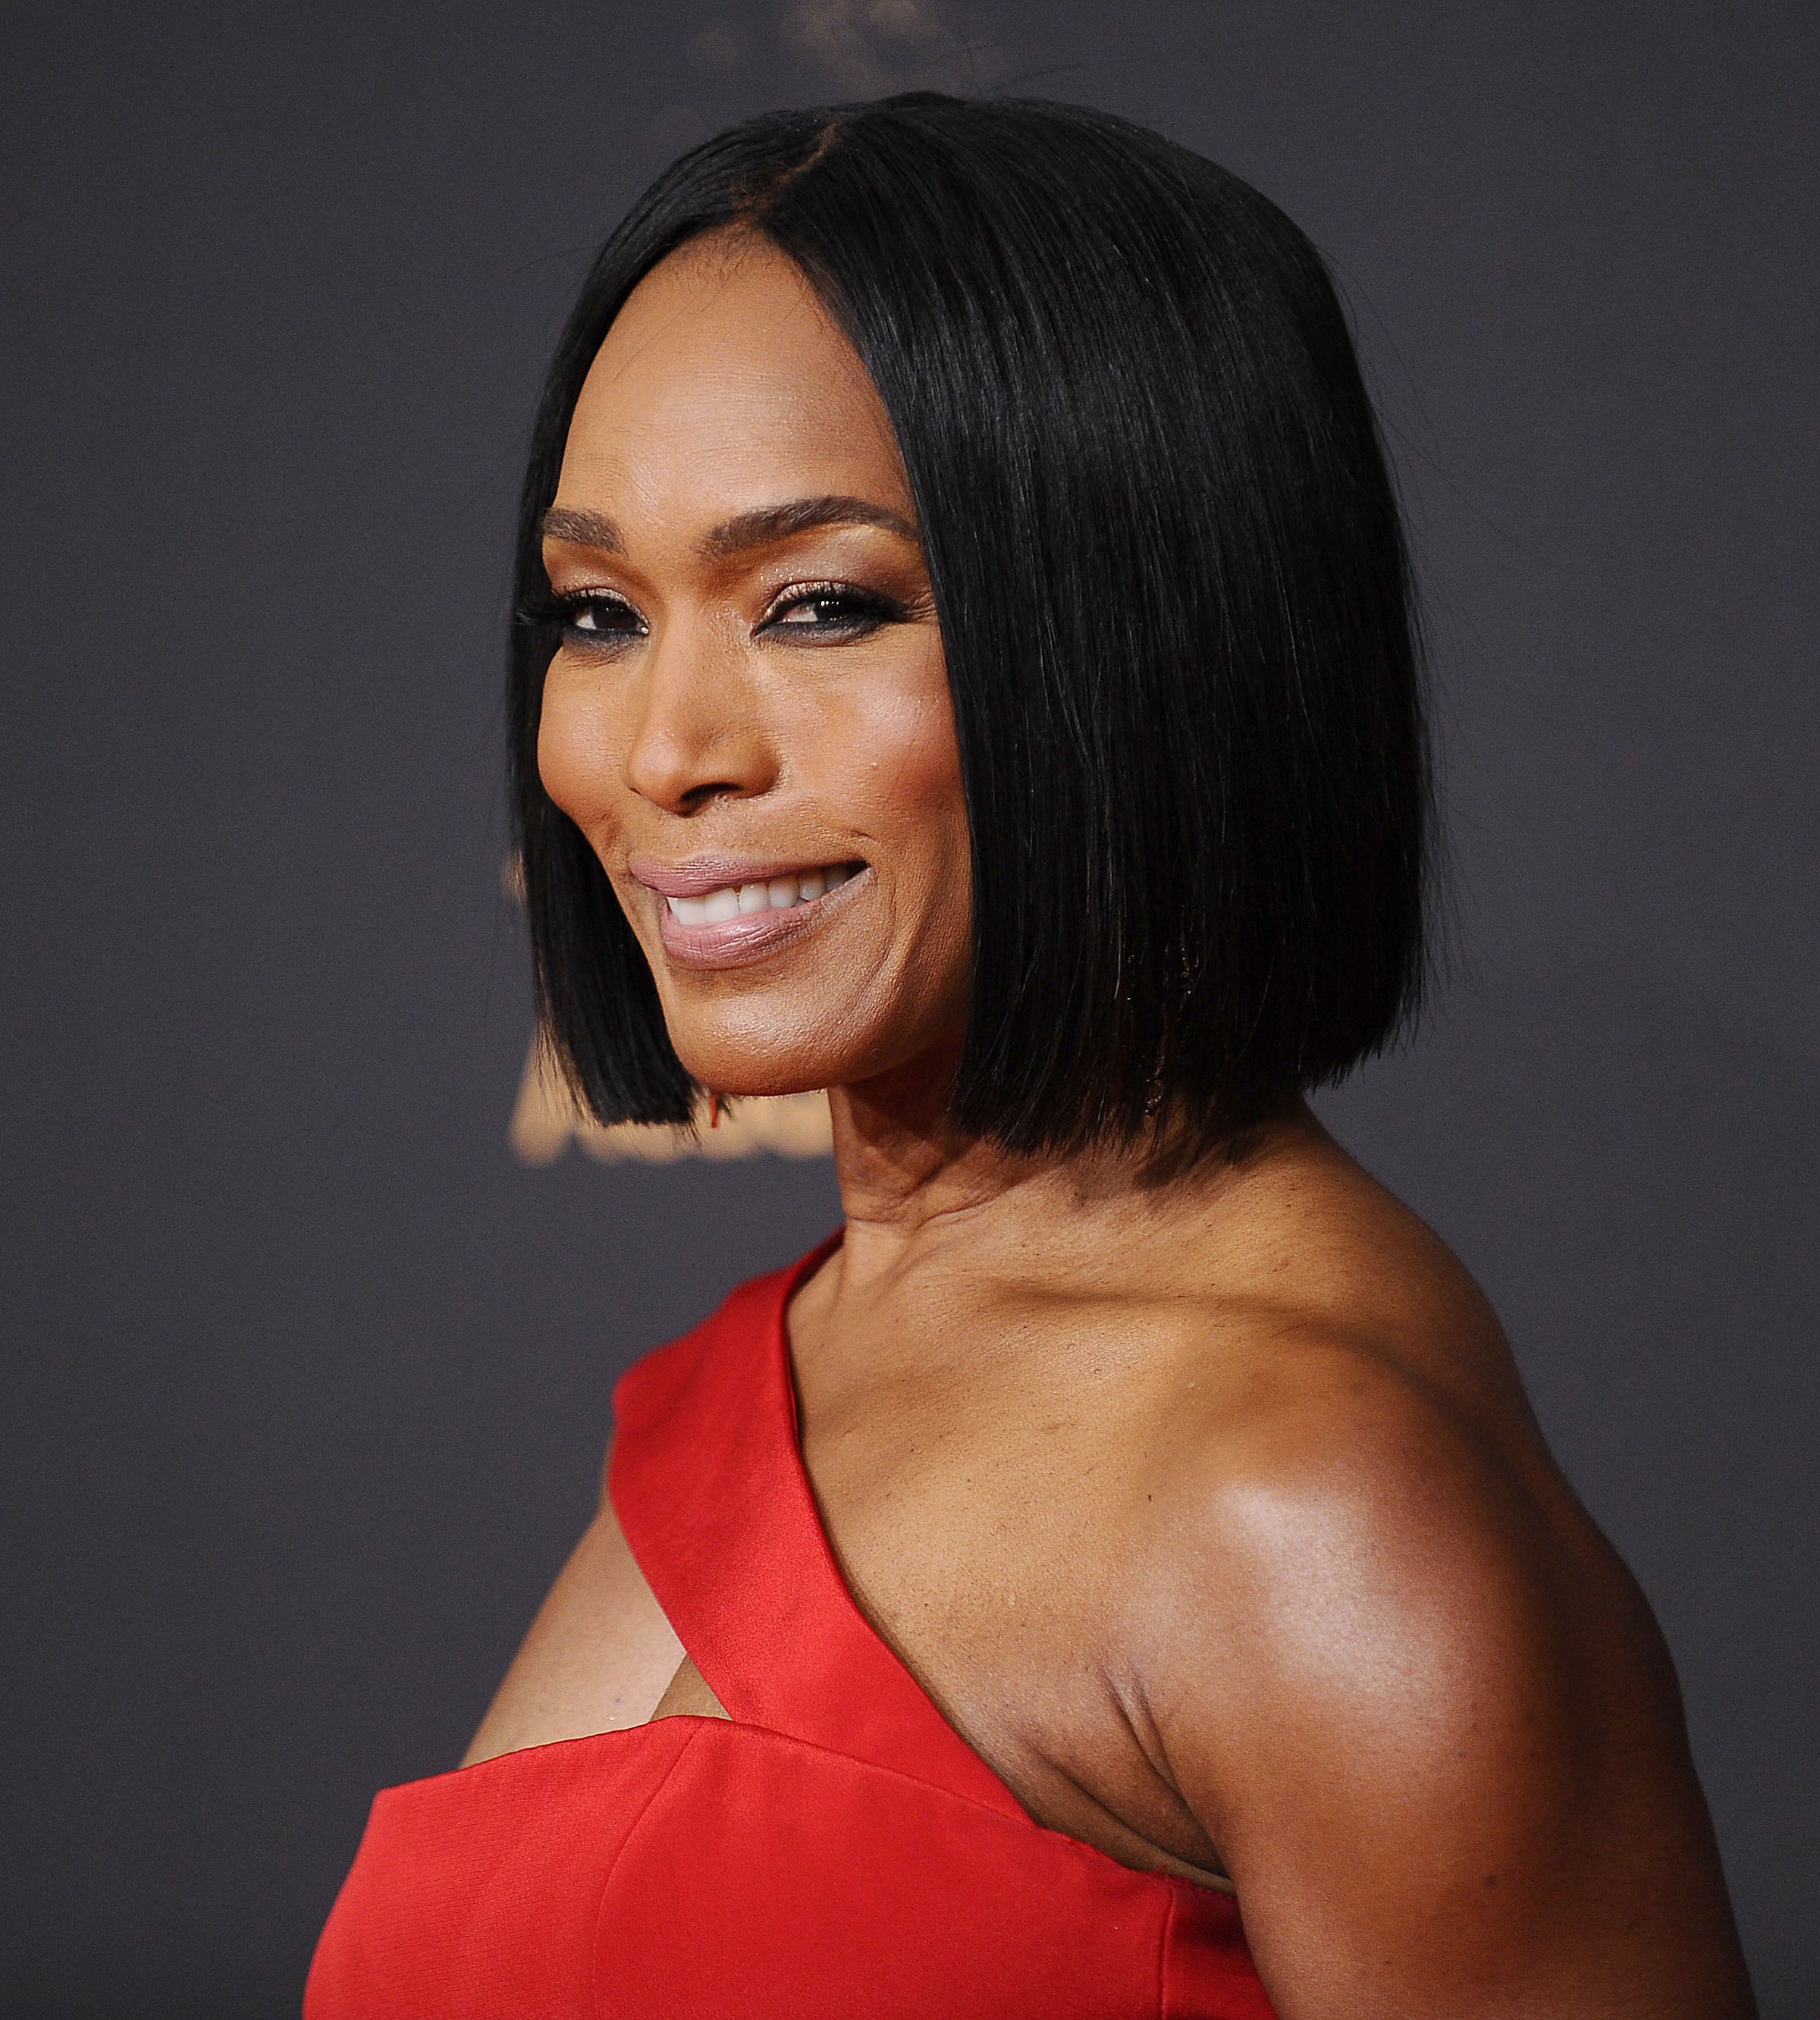 Angela Bassett Had A 'Delectable Amount Of Fun' Playing The Bad Guy In 'Bumblebee'